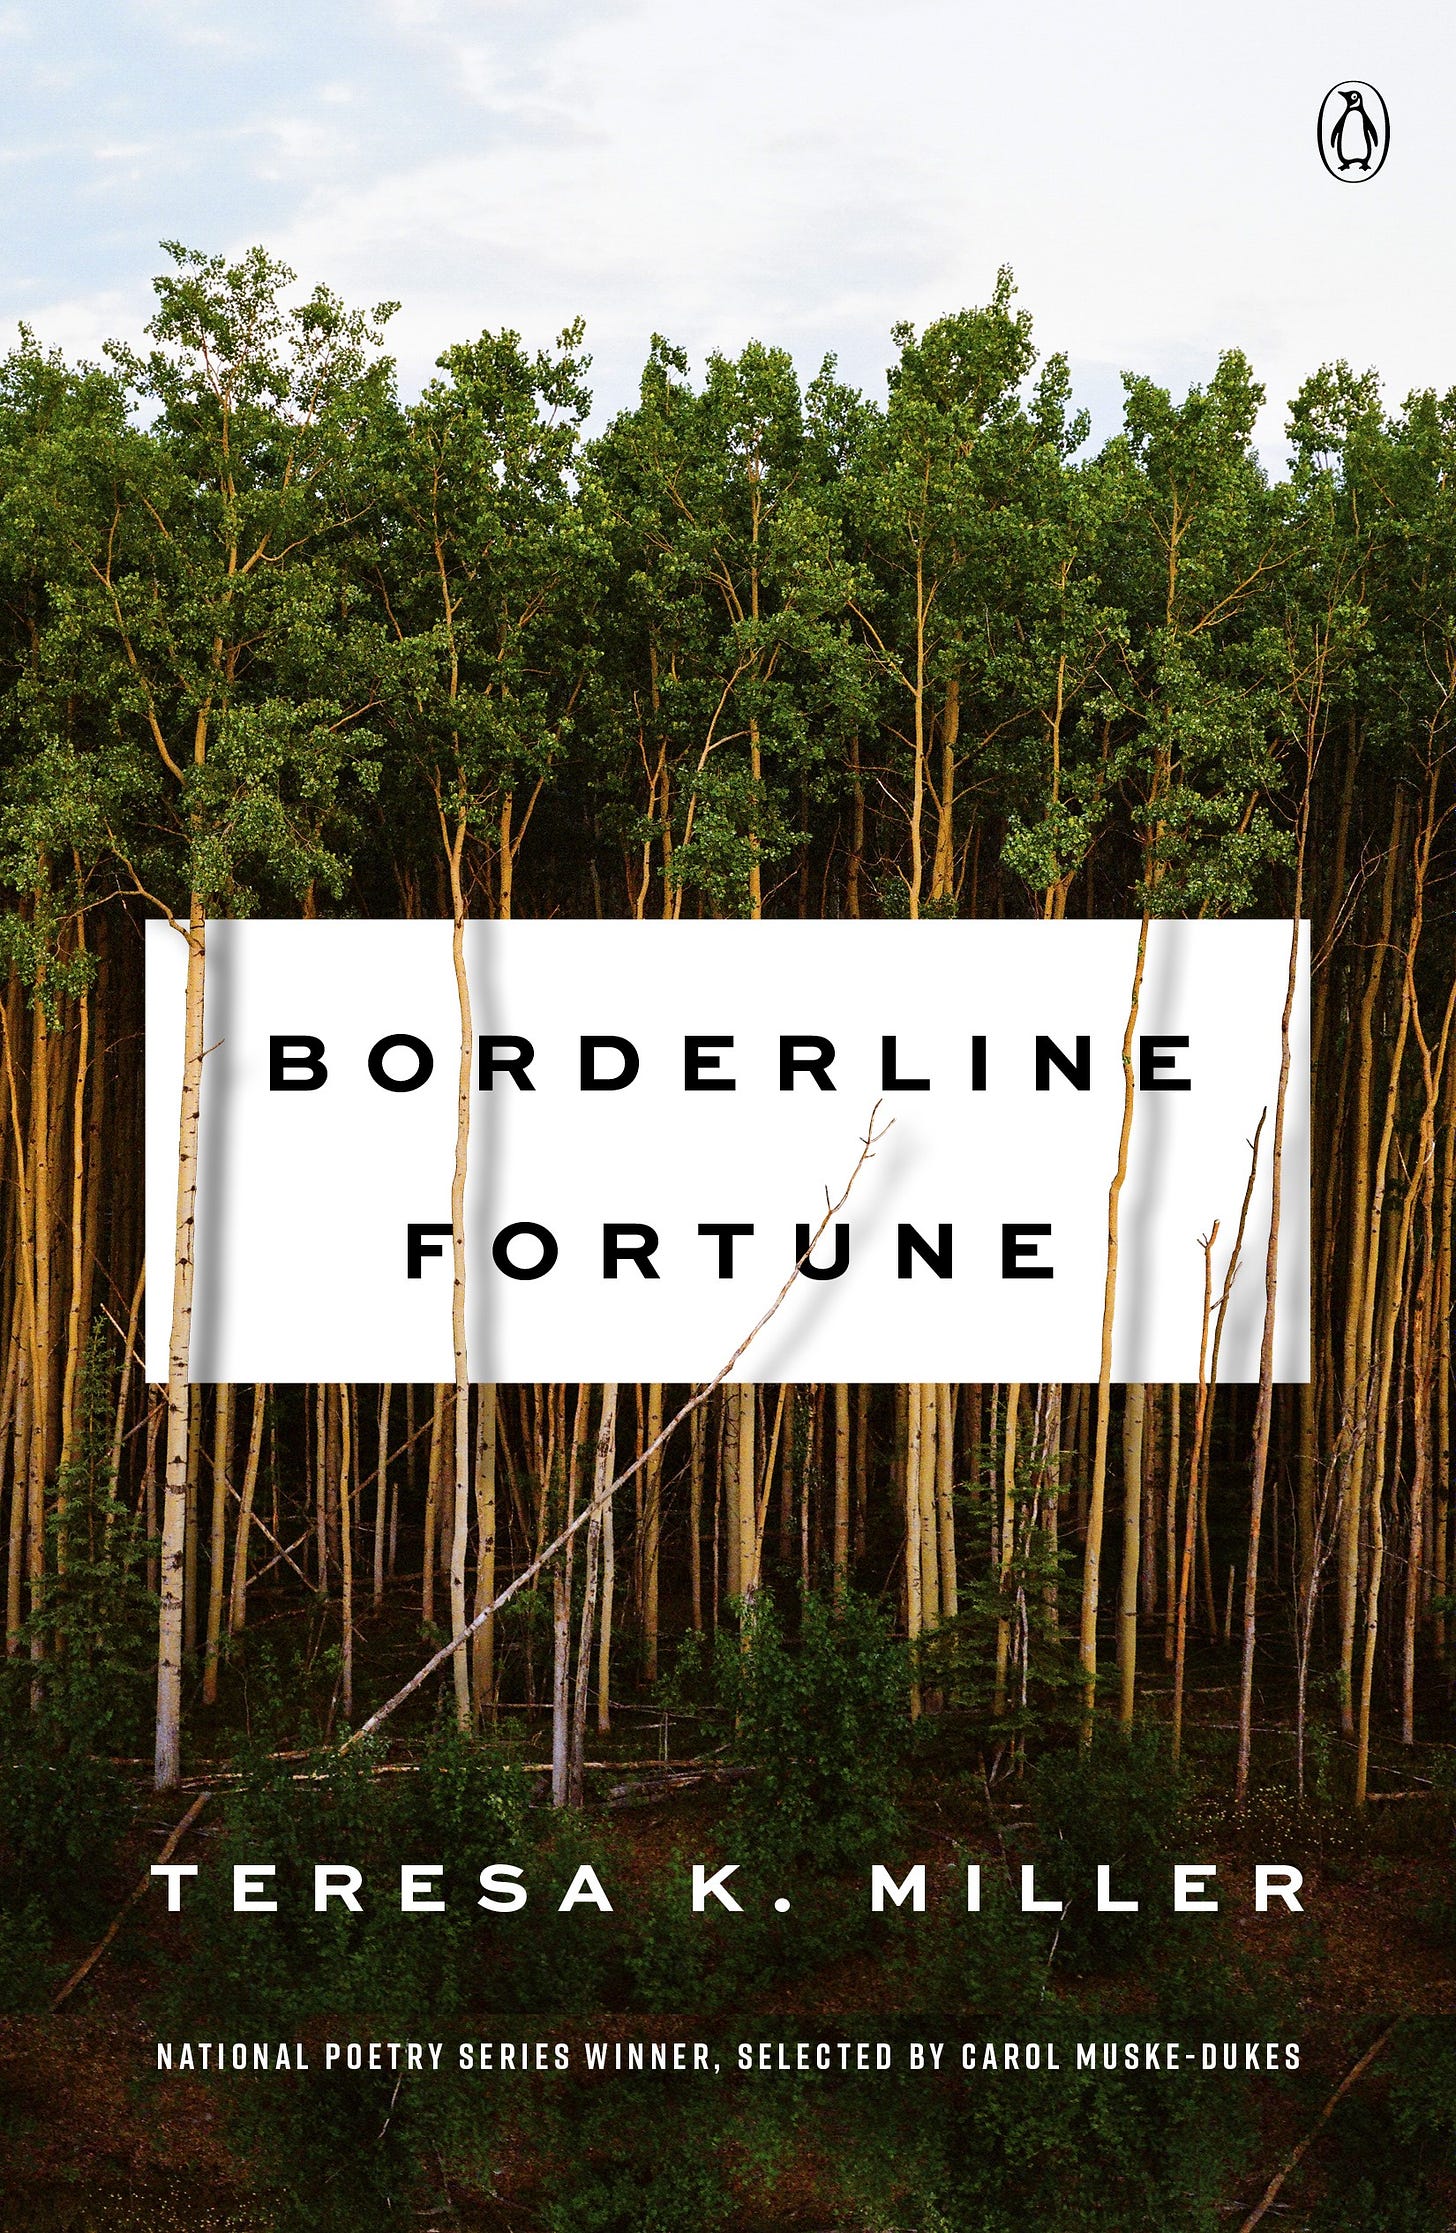 This is the book cover for Borderline Fortune by Teresa K. Miller